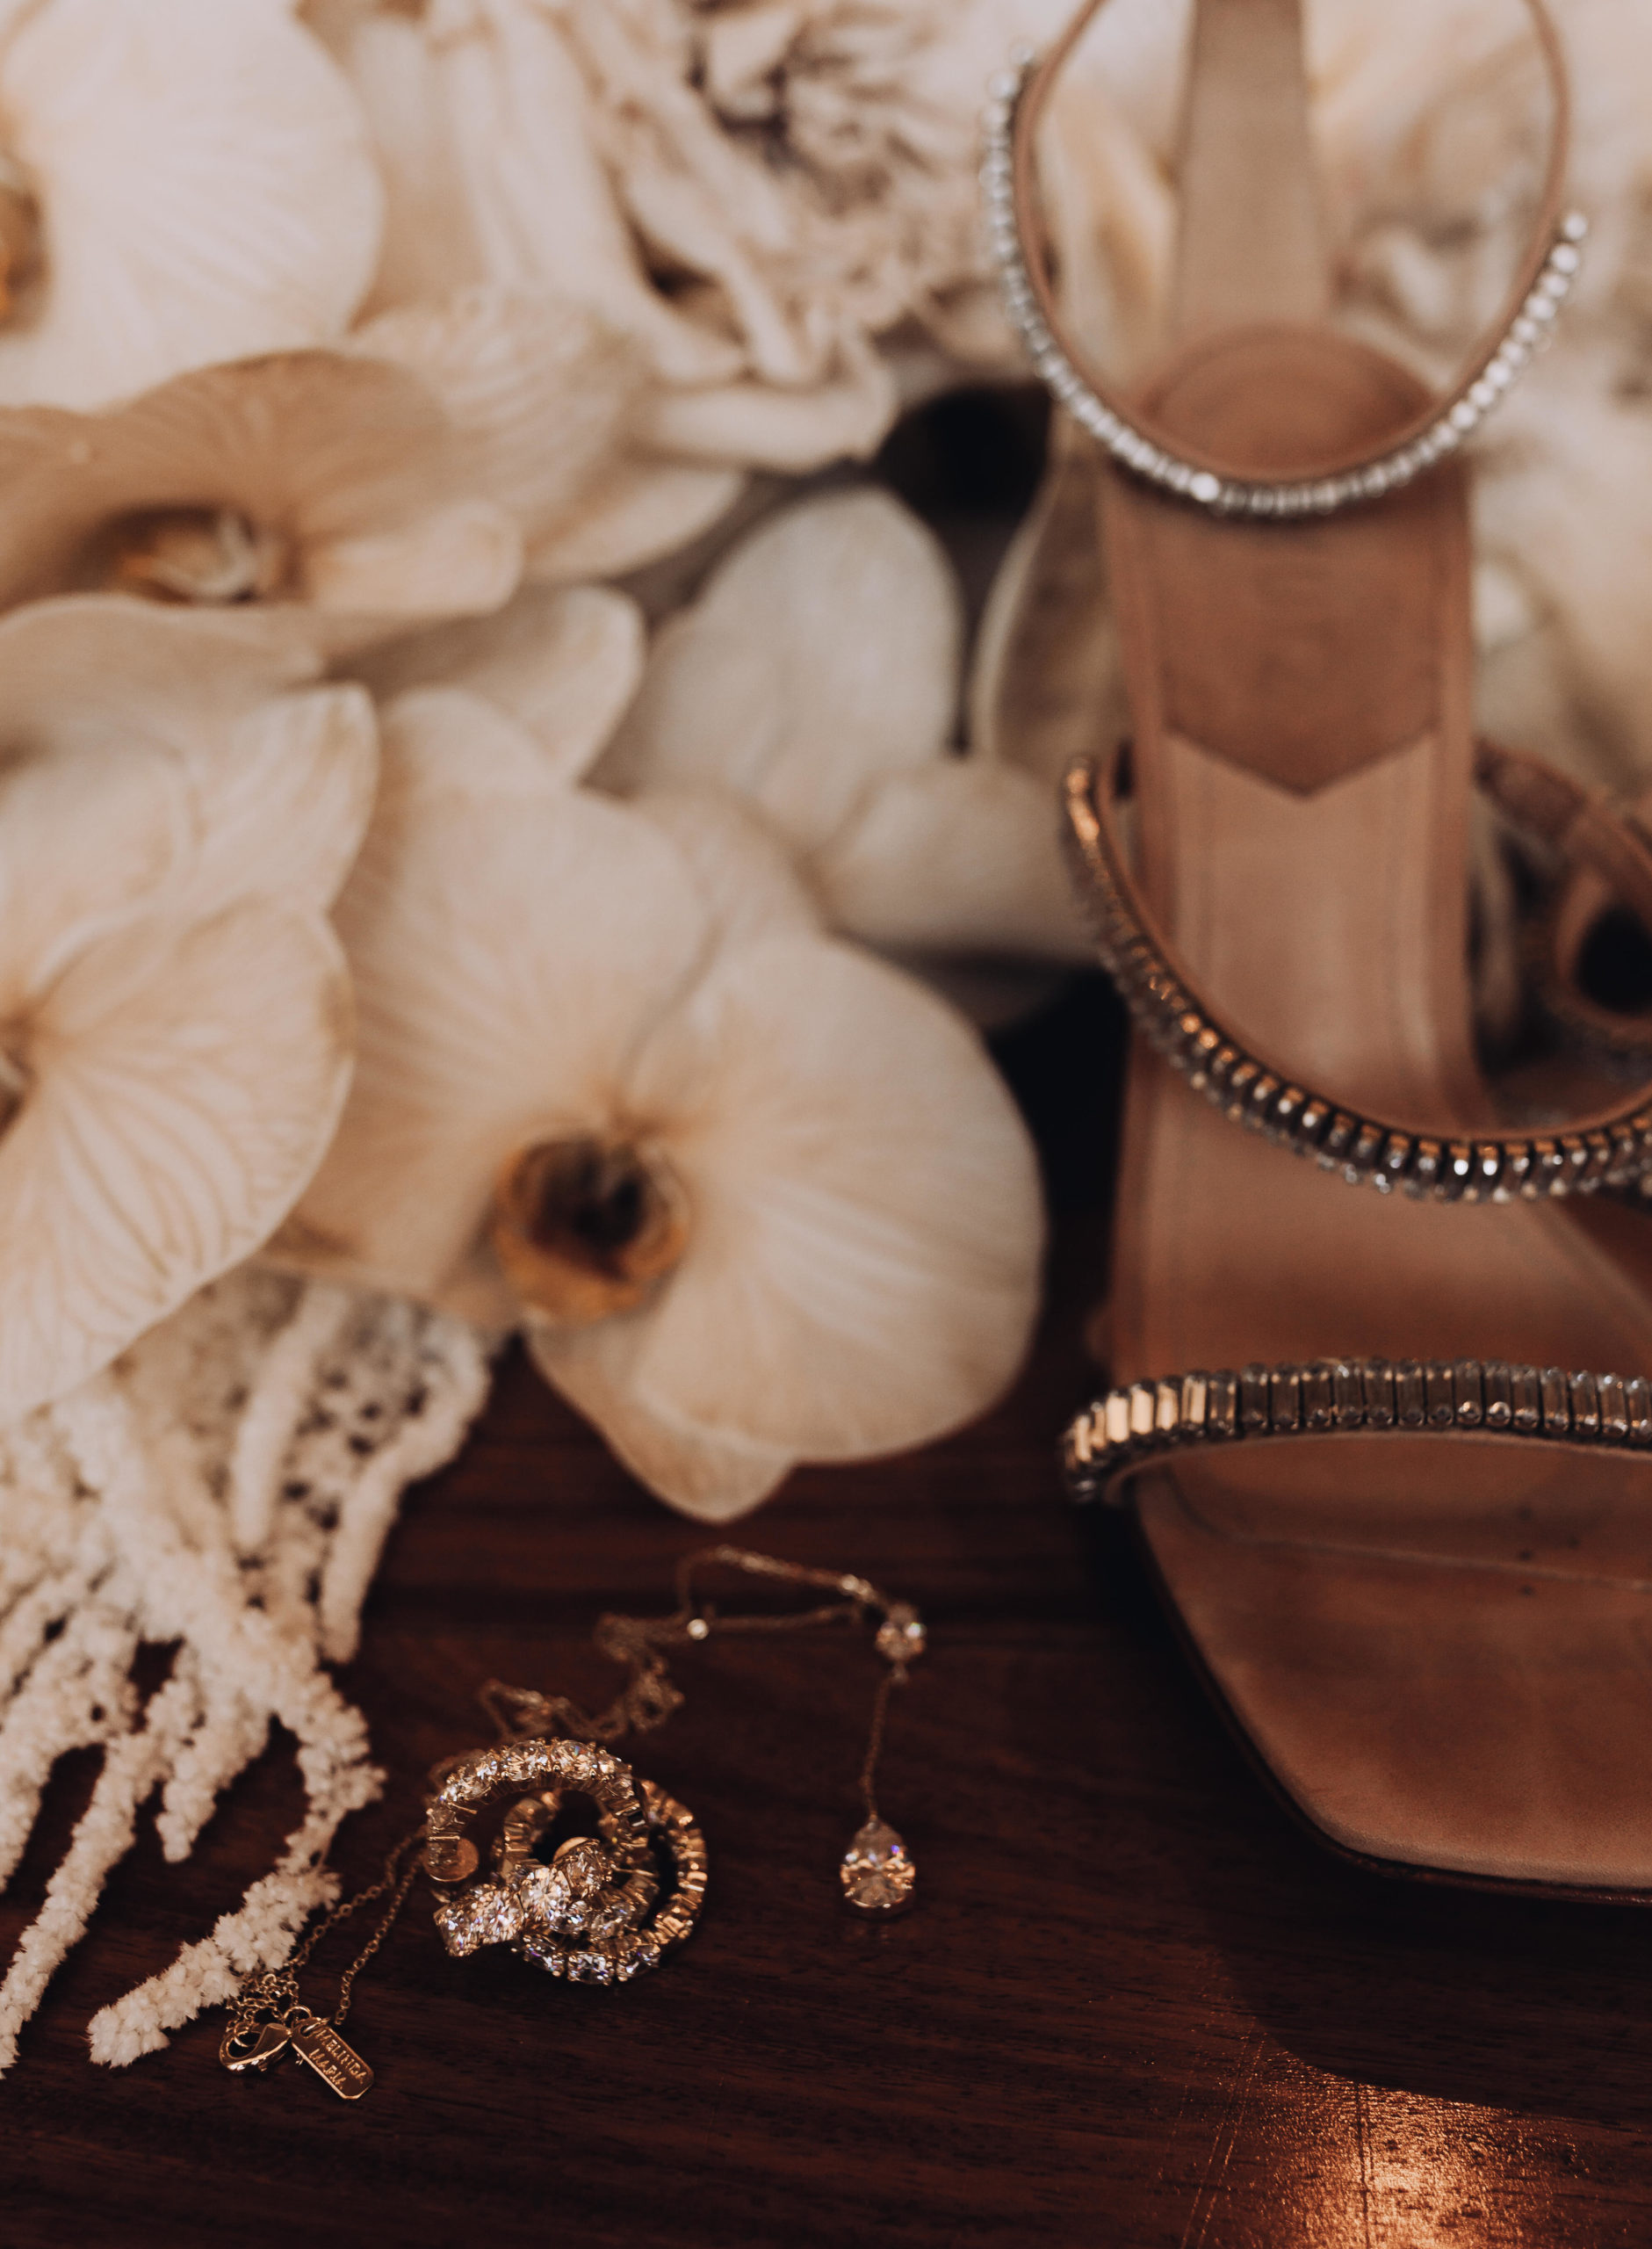 Lake Las Vegas Meets Modern Boho Bride. Detail of the brides accessories with her wedding day shoes, diamond earrings and necklace with pieces of her bouqet